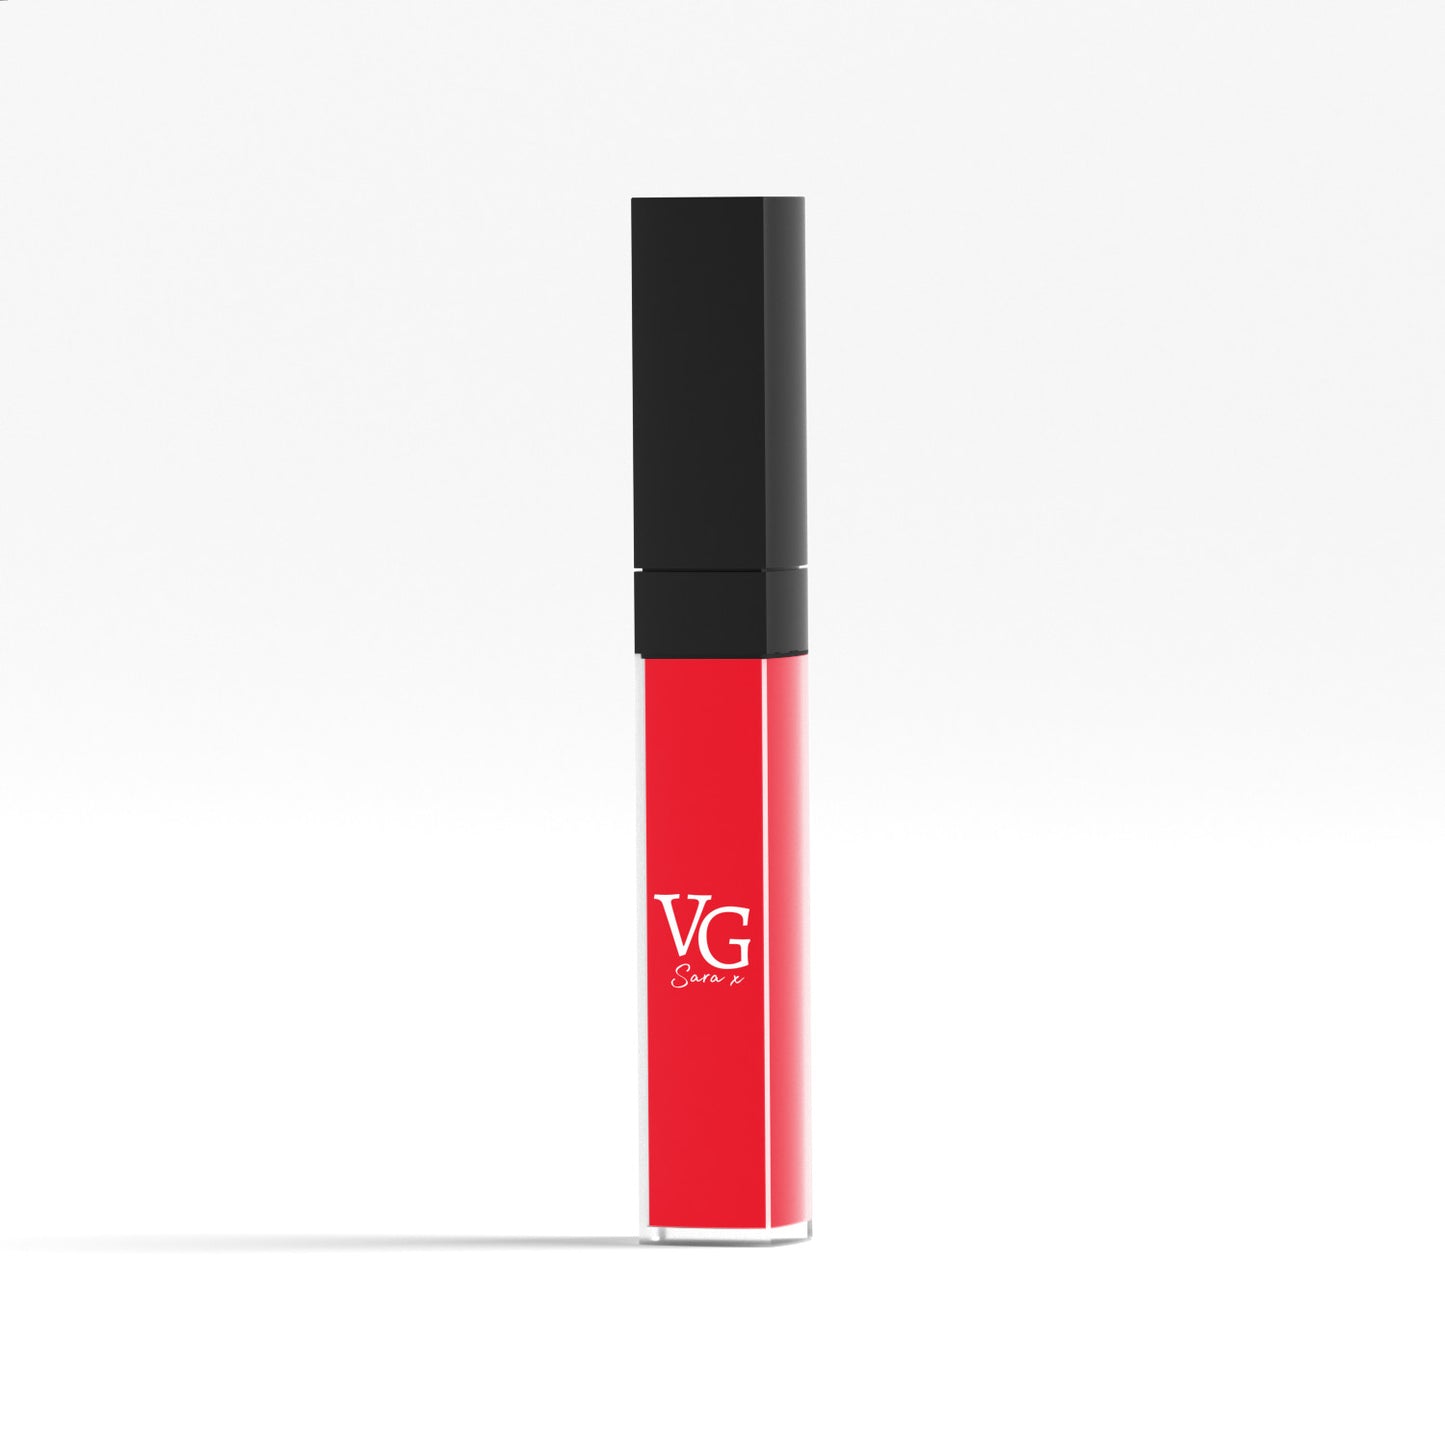 VG branded vegan lipstick in its container